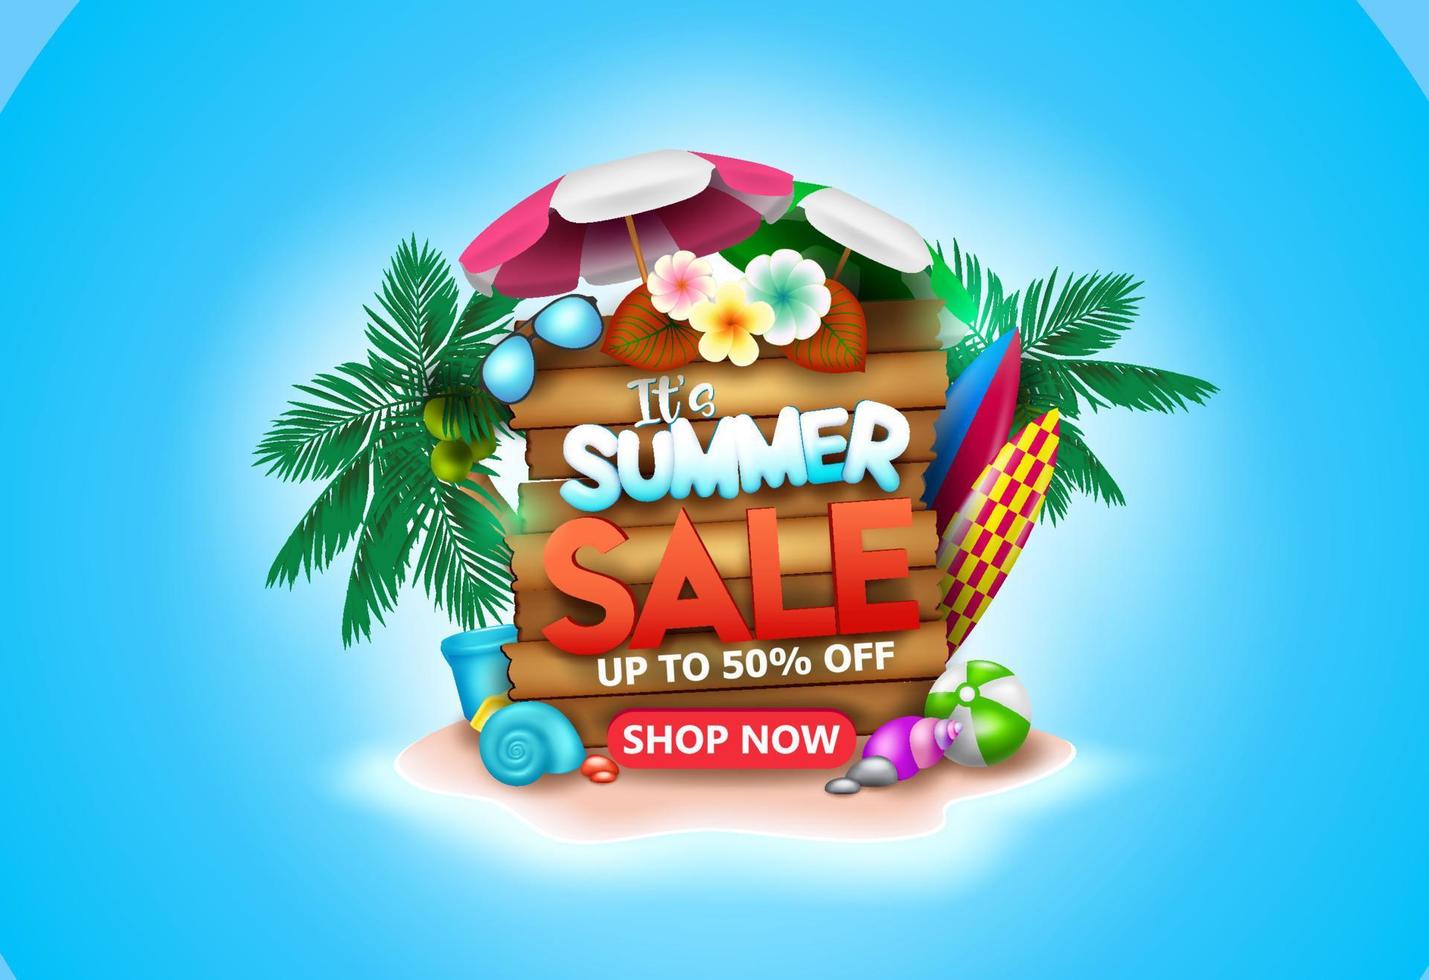 Summer sale vector banner design. It's summer sale text in beach island background for tropical season holiday discount promotion. Vector illustration